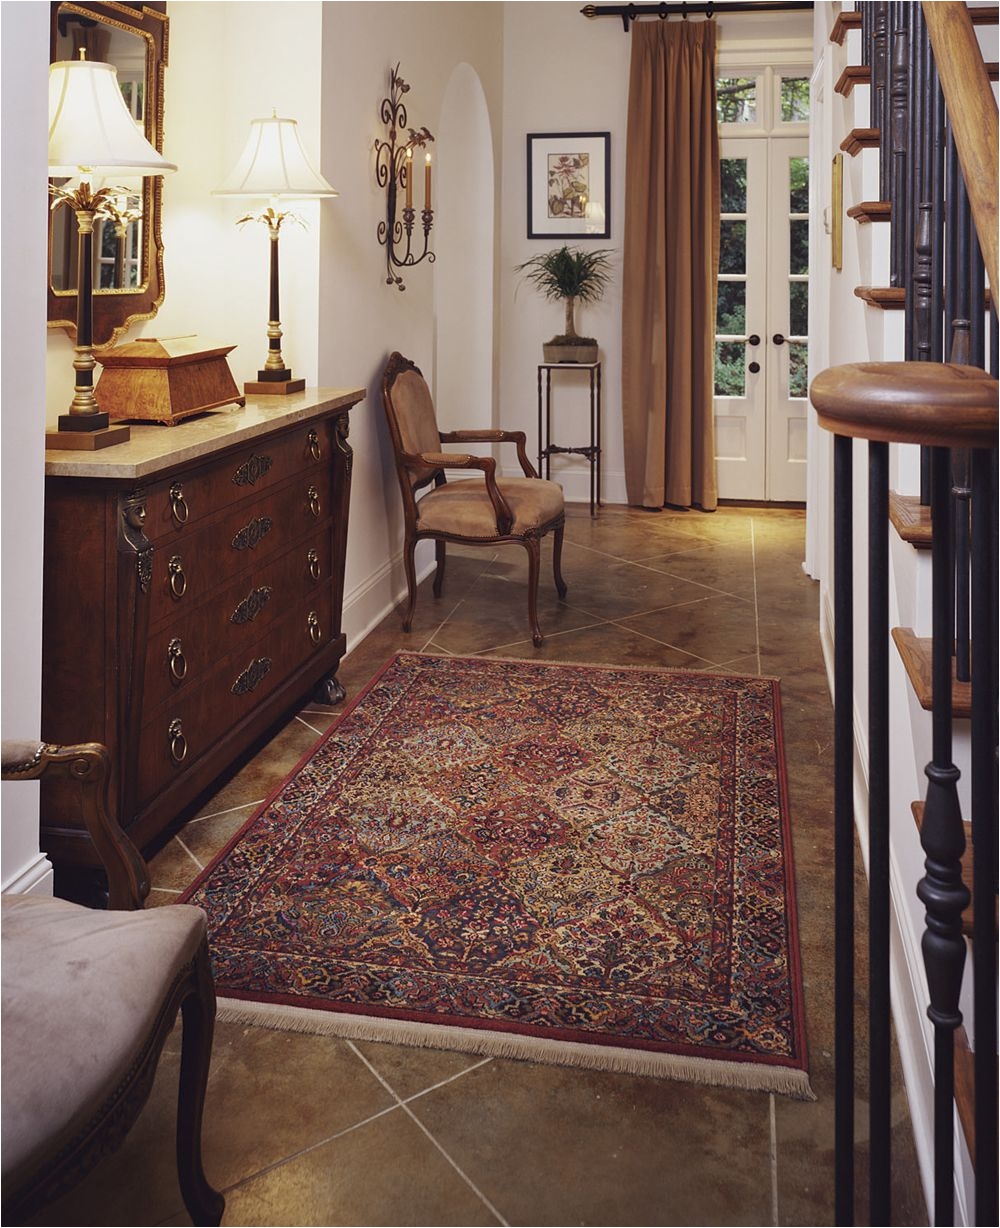 alexanian s original karastan area rug each rug is axminster woven using the finest imported skein